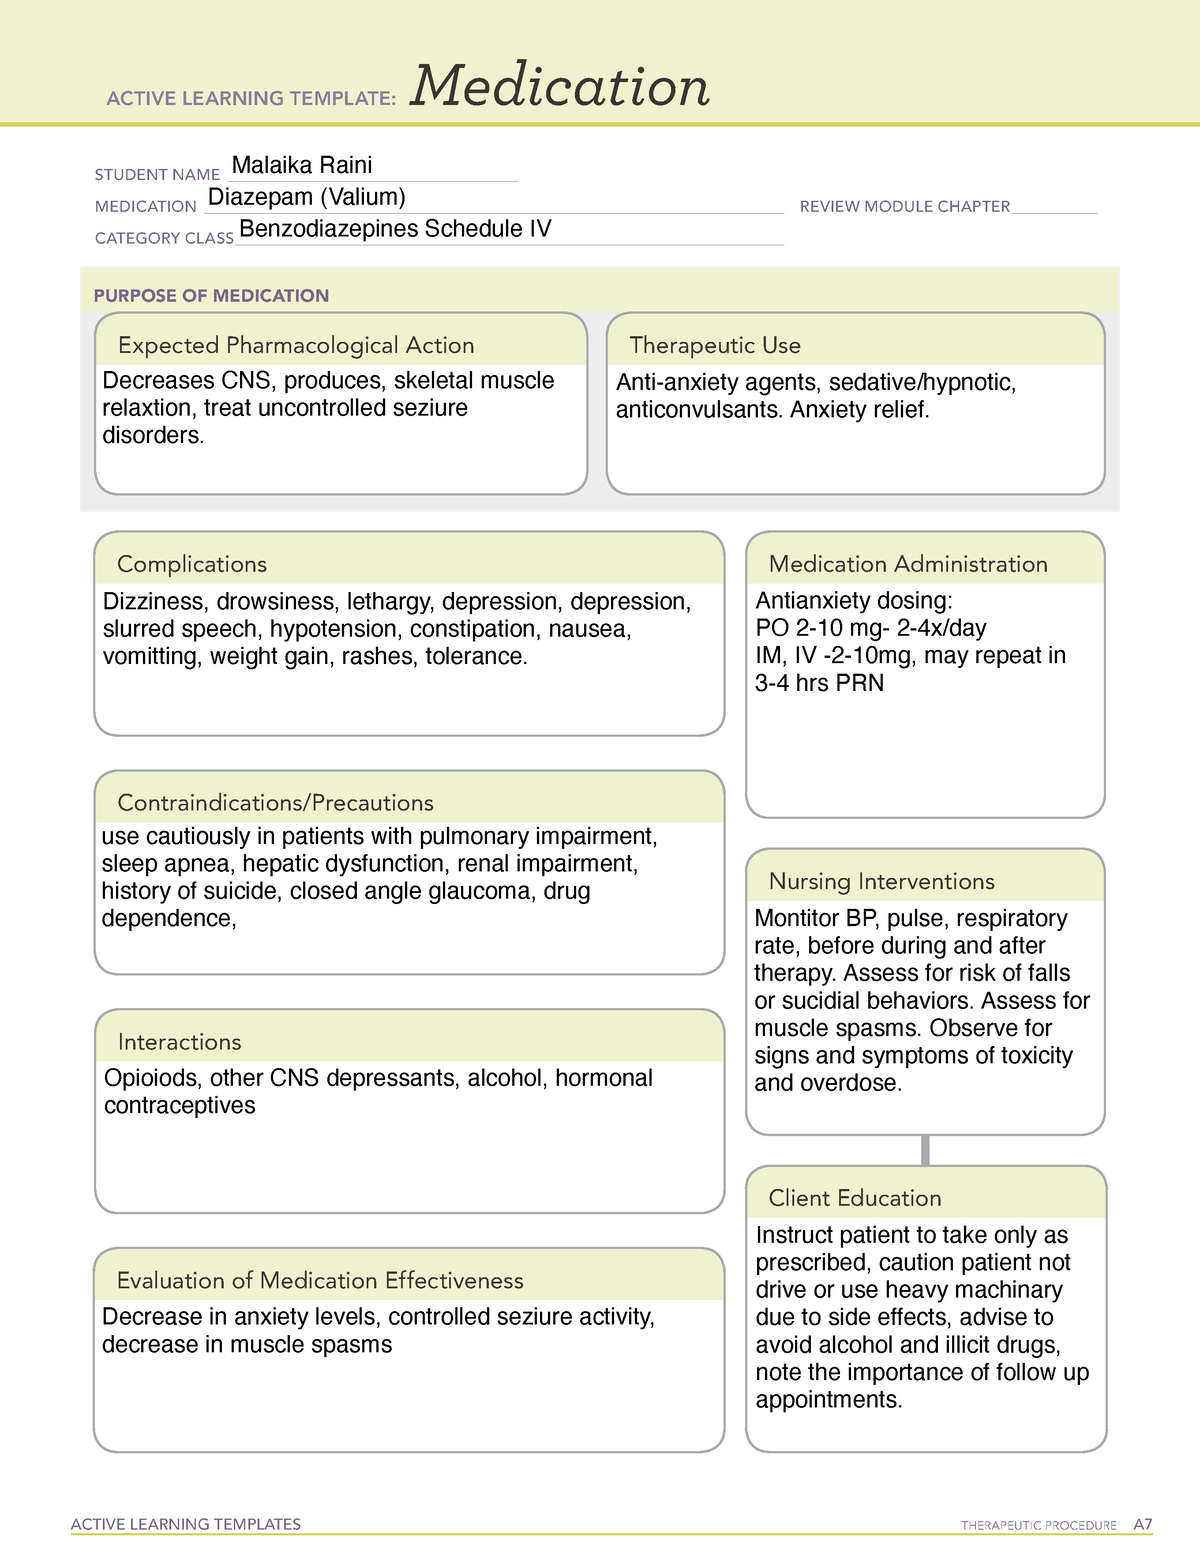 active-learning-template-medication-4-active-learning-templates